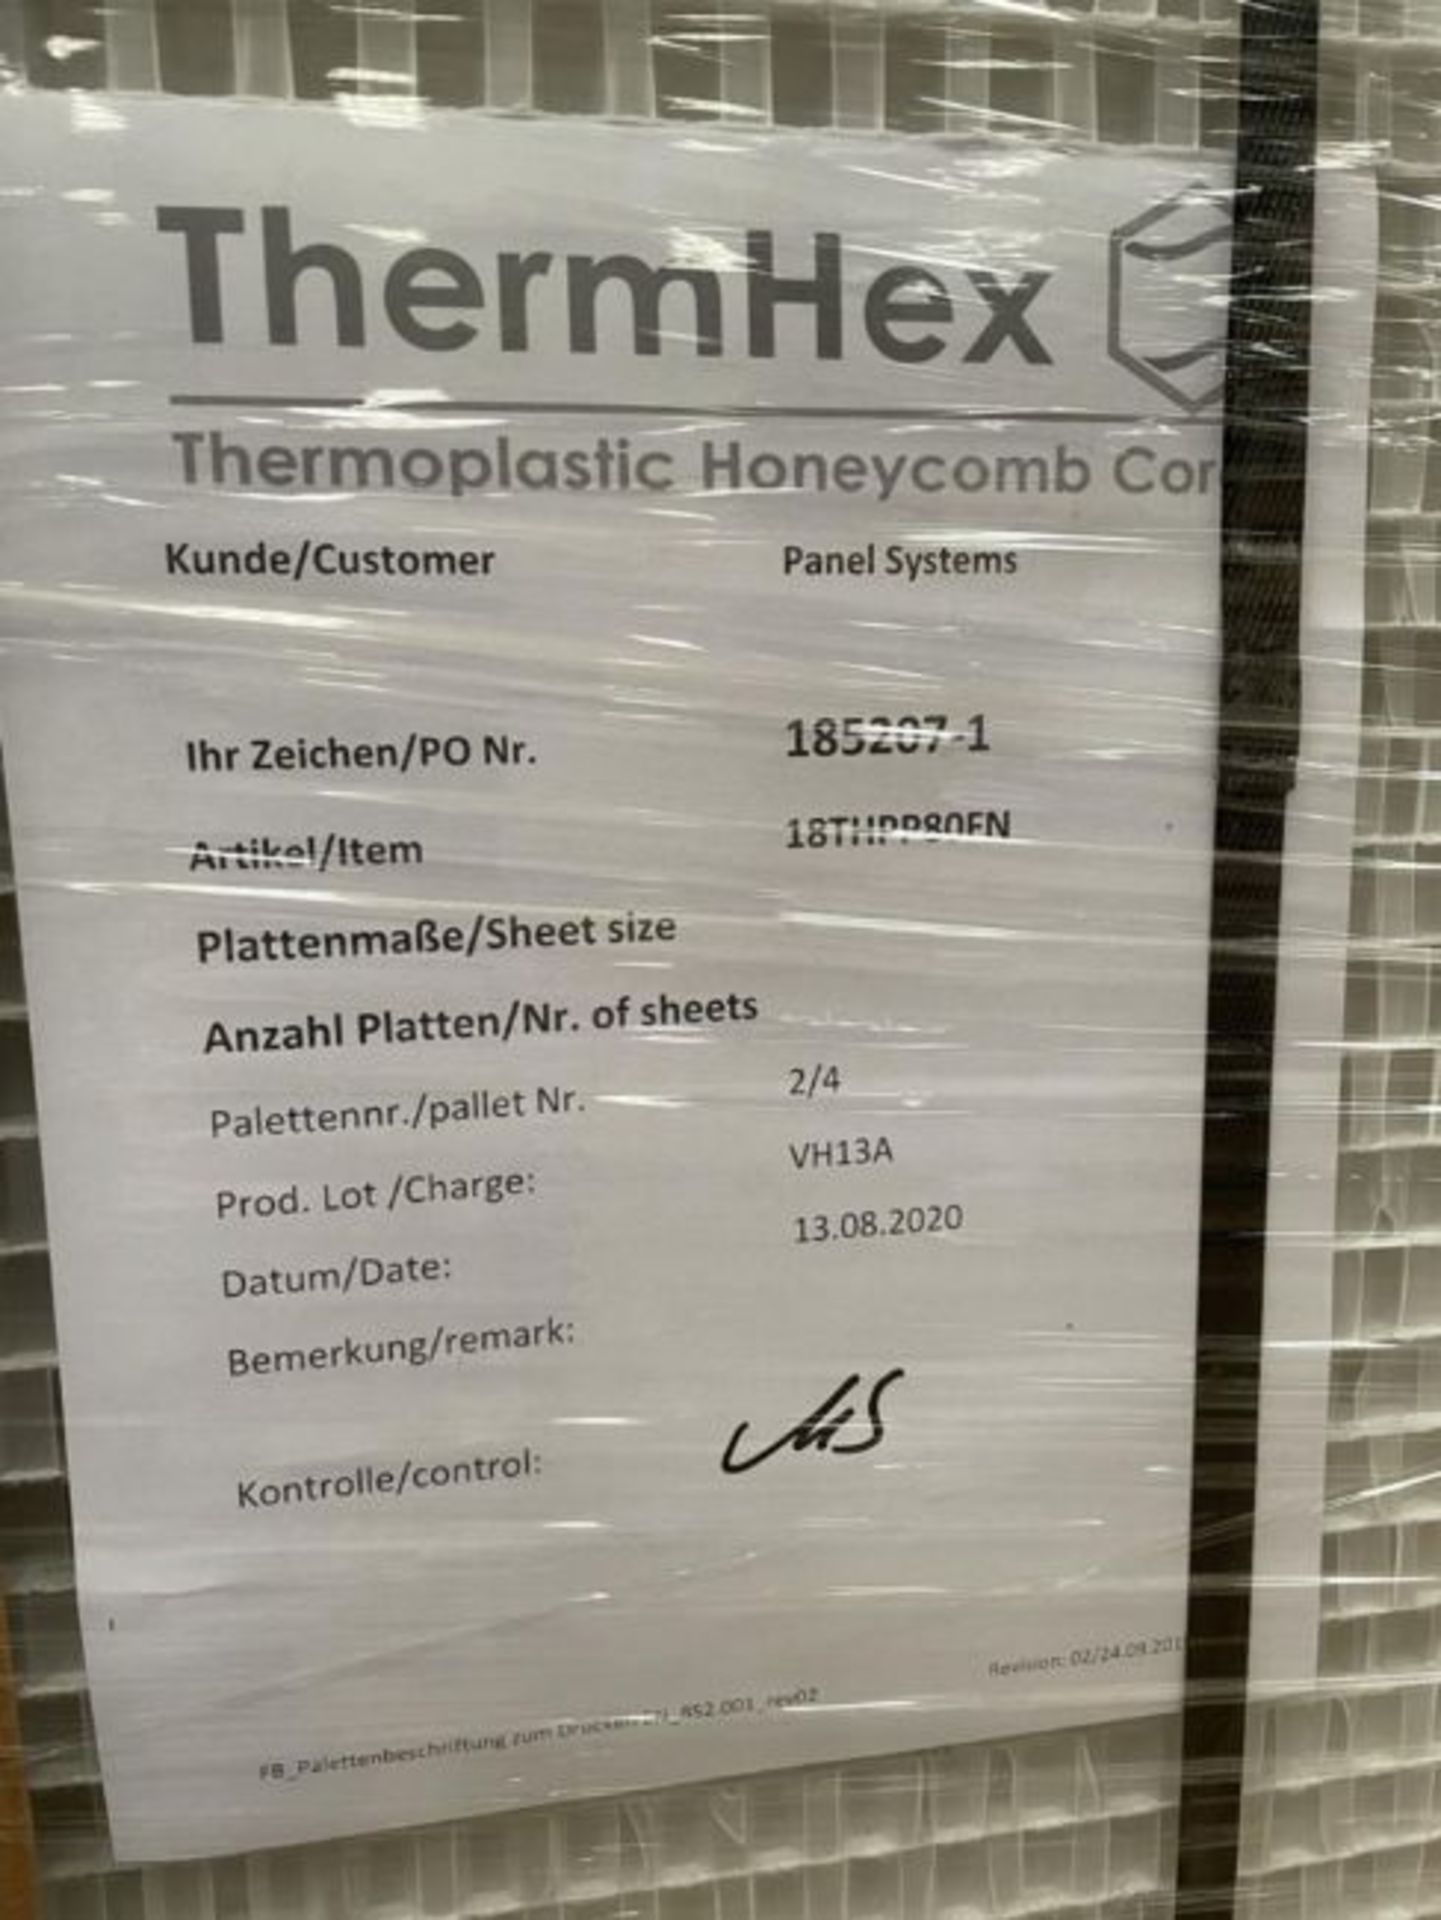 100 x ThermHex Thermoplastic Honeycomb Core Panels - Size: 693 x 1210 x 20mm - New Stock - Lightweig - Image 7 of 10